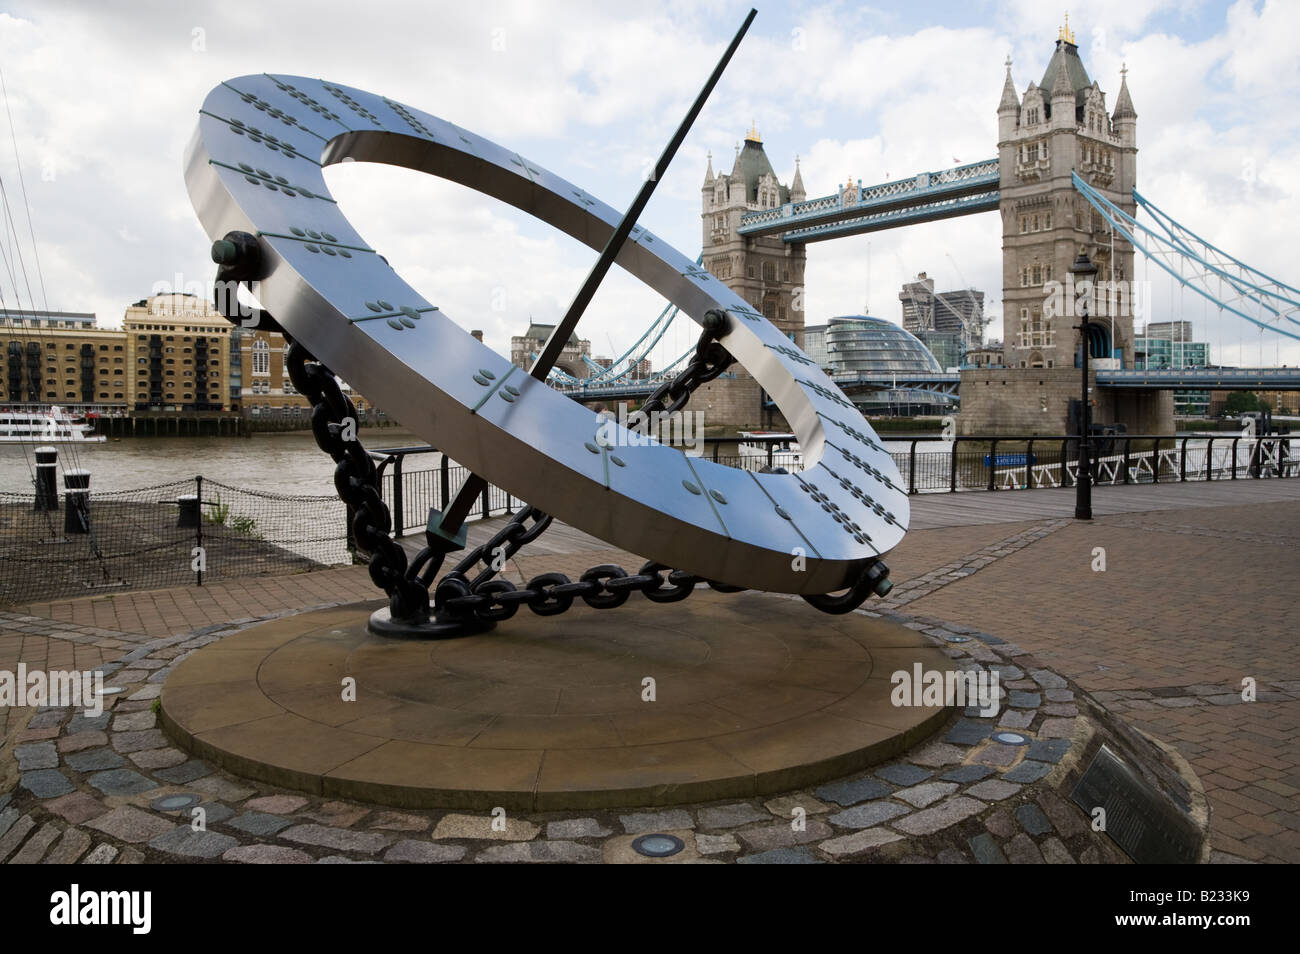 The Timepiece sculpture is on the banks of the Thames with Tower Bridge in the background Stock Photo